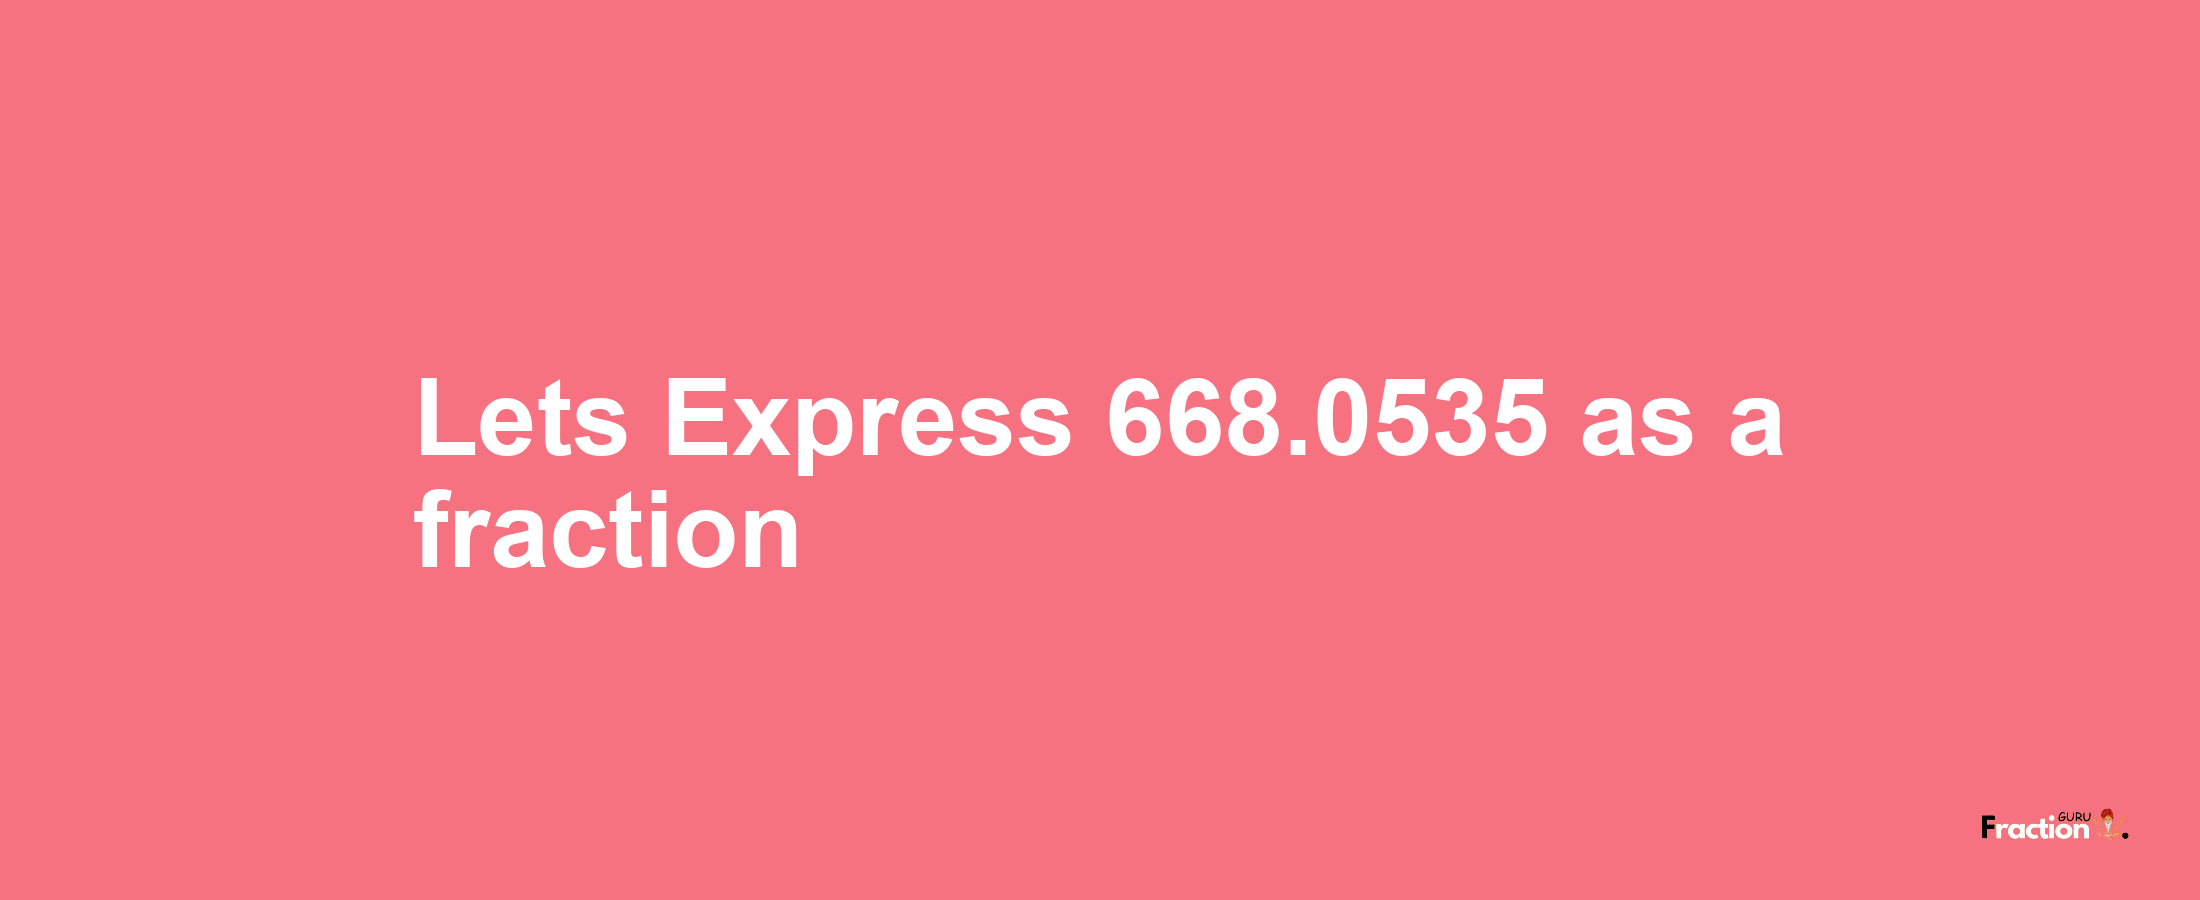 Lets Express 668.0535 as afraction